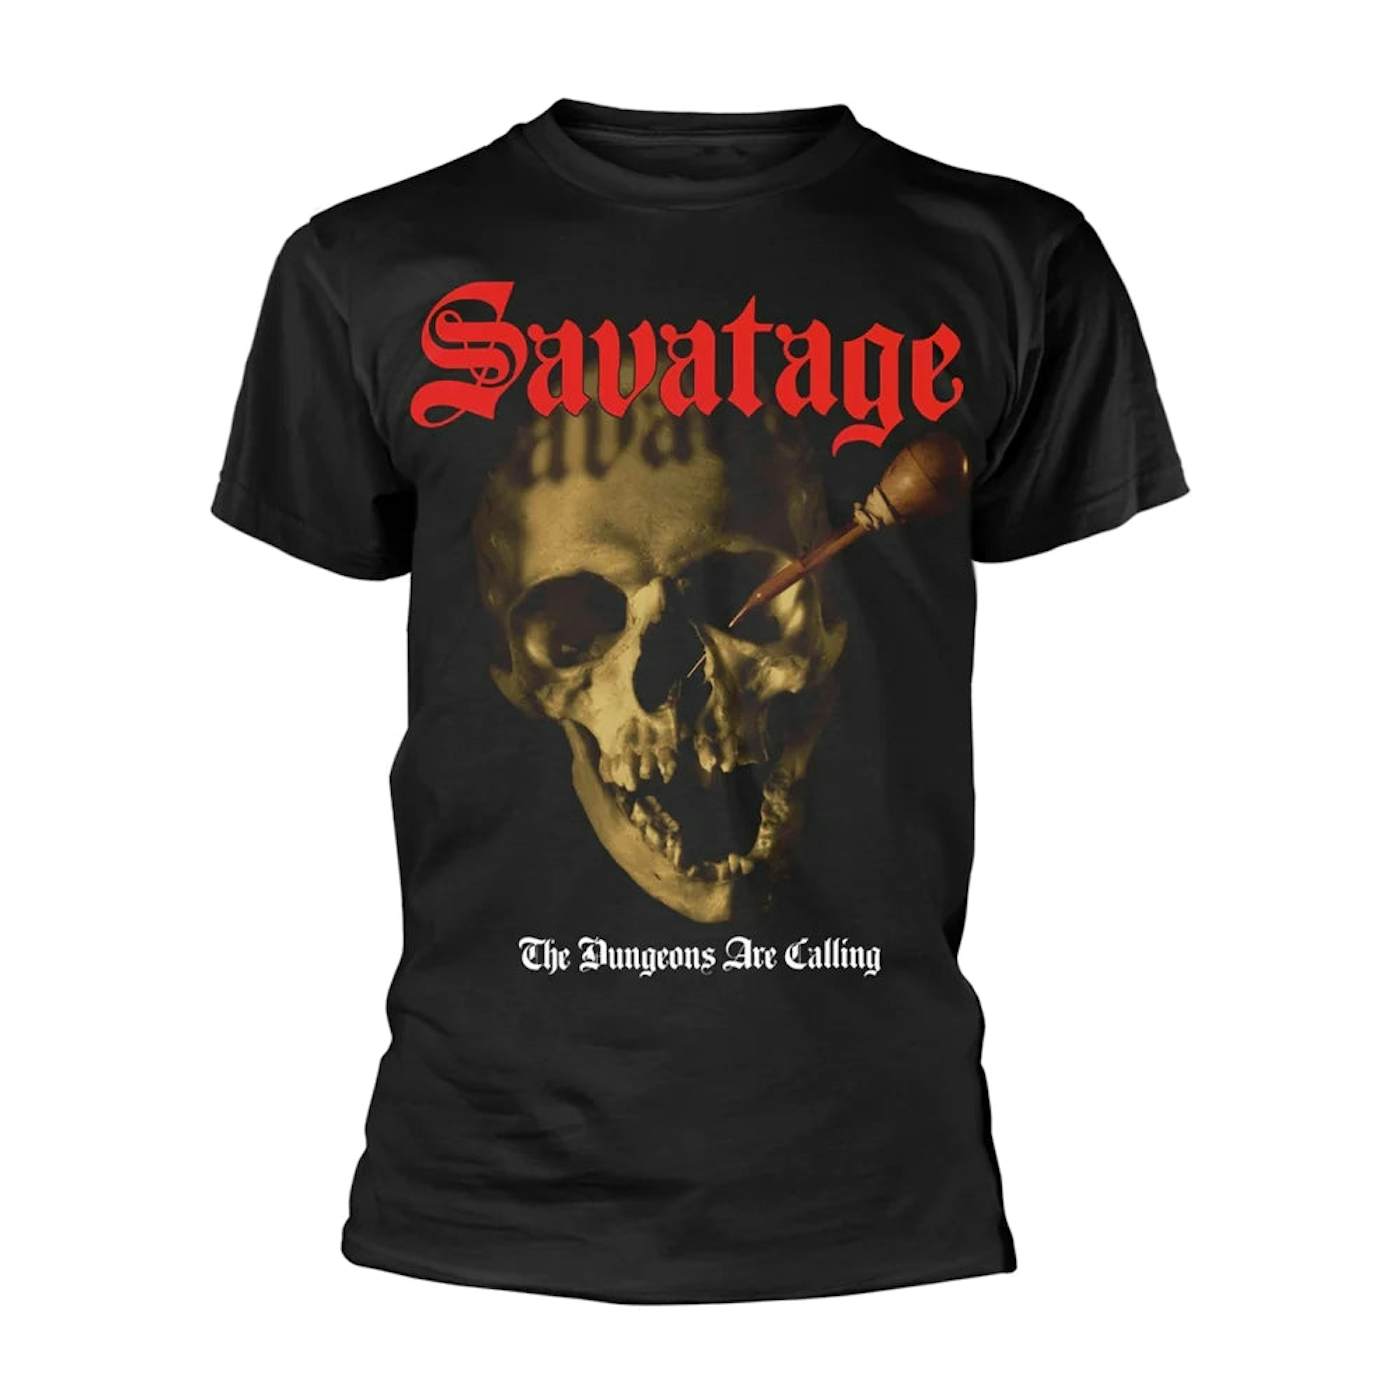 Savatage T Shirt - The Dungeons Are Calling